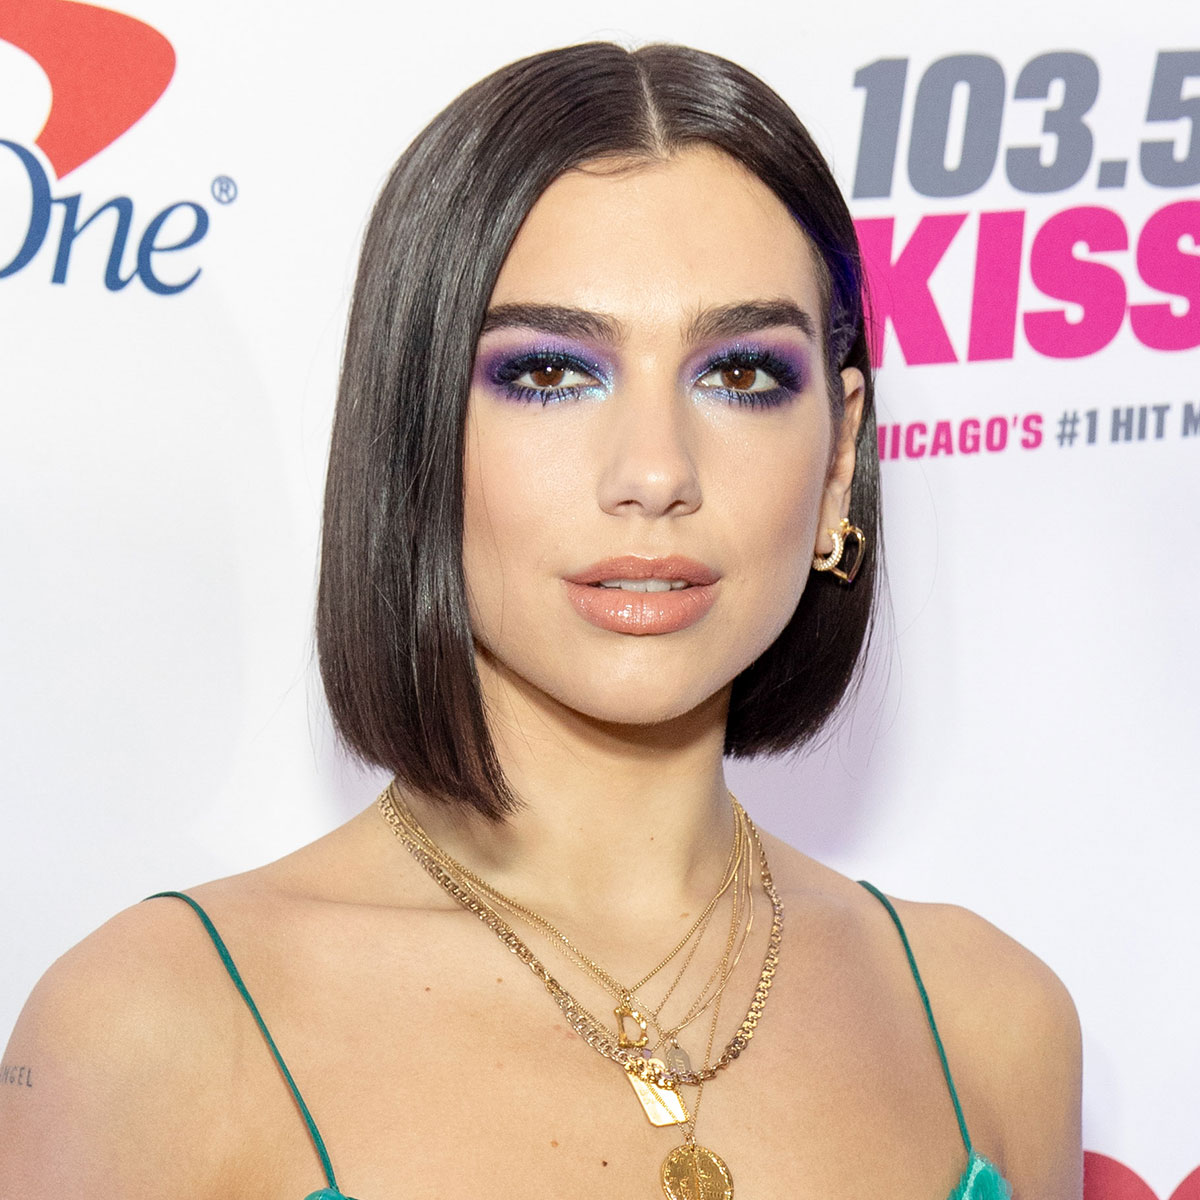 Dua Lipa in Mexico: What has the singer visited in Mexico City